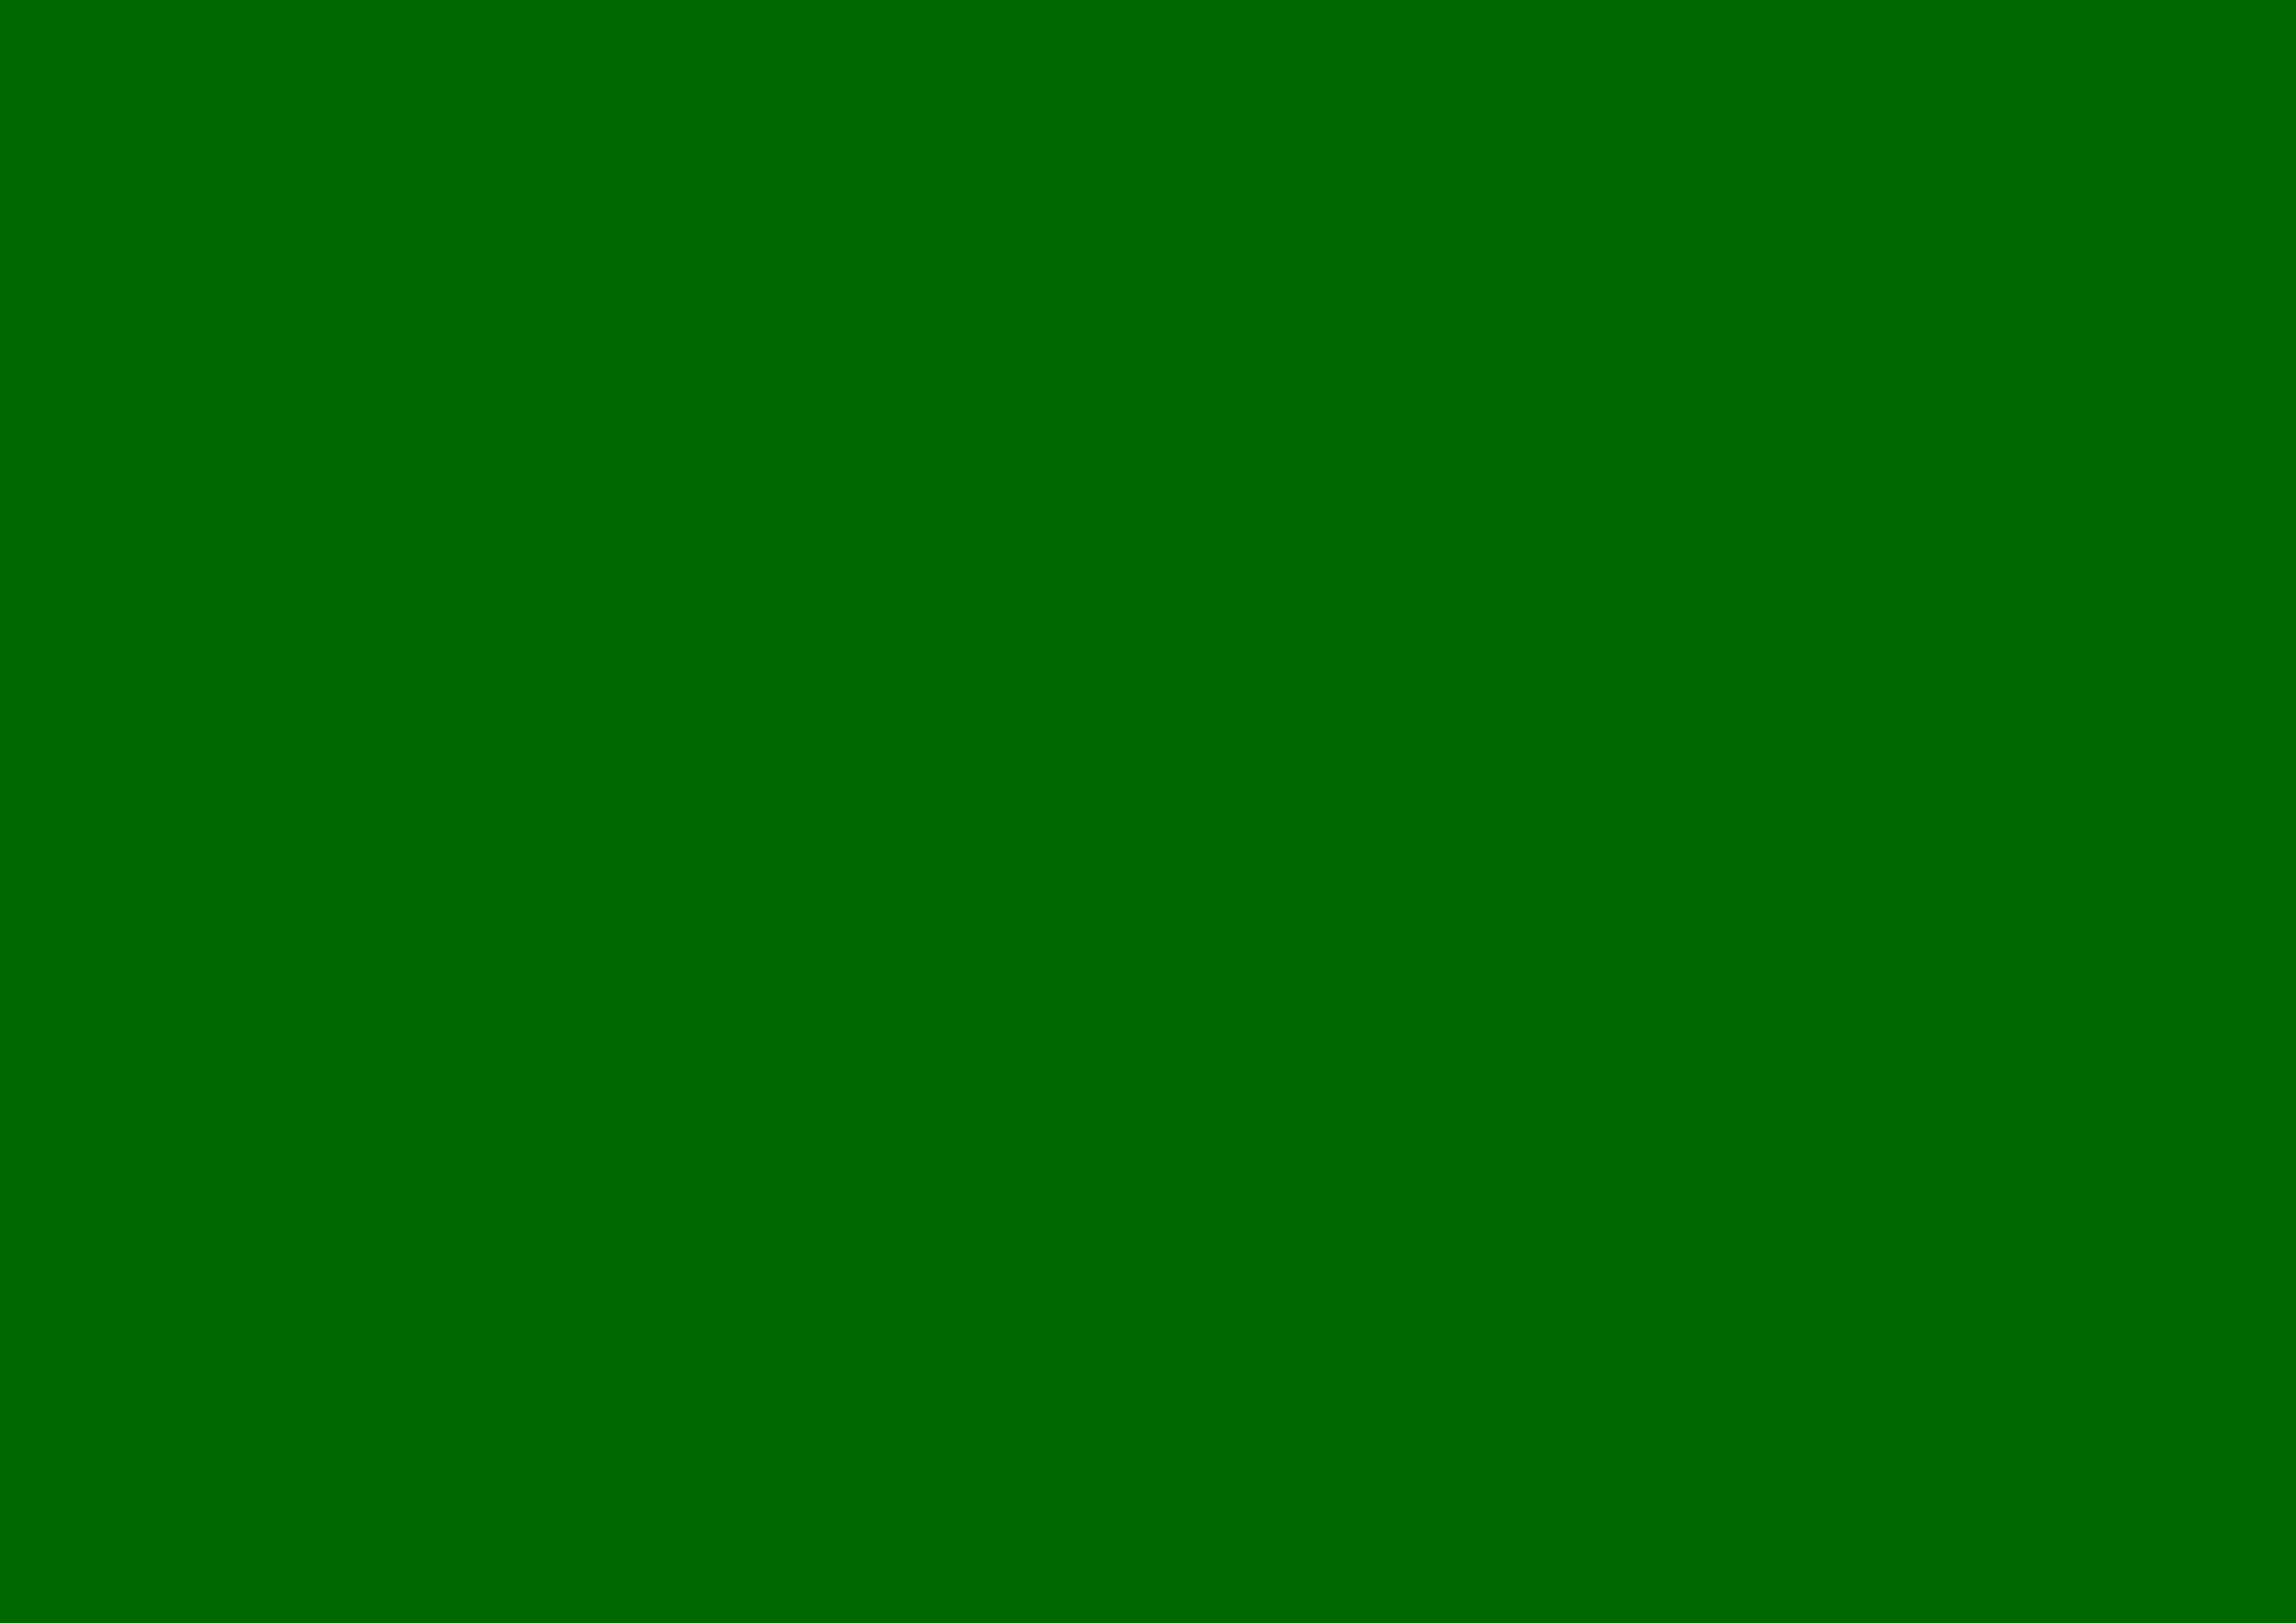 3508x2480 Pakistan Green Solid Color Background